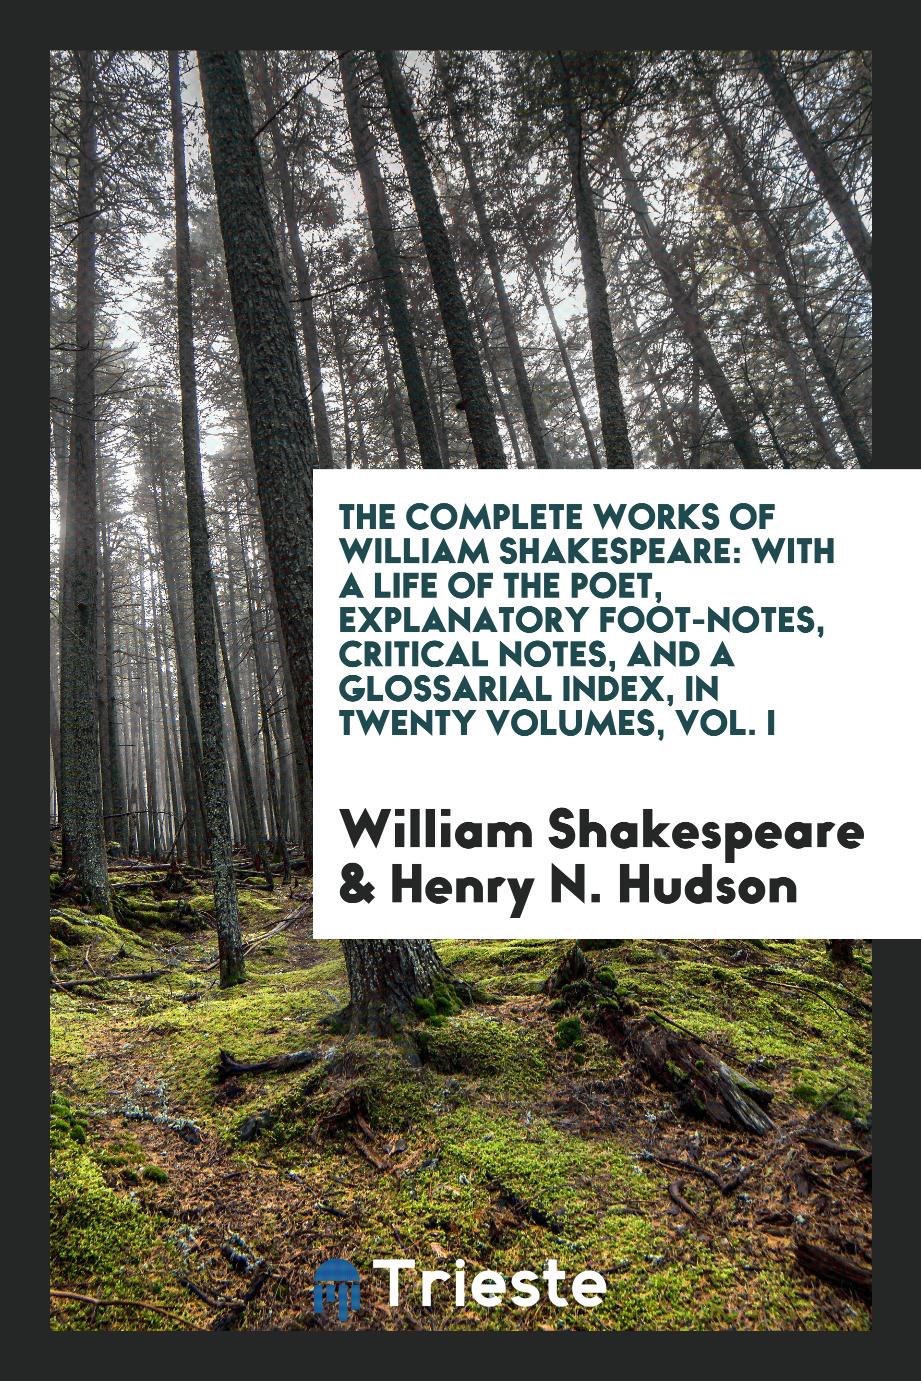 The Complete Works of William Shakespeare: With a Life of the Poet, Explanatory Foot-Notes, Critical Notes, and a Glossarial Index, in Twenty Volumes, Vol. I